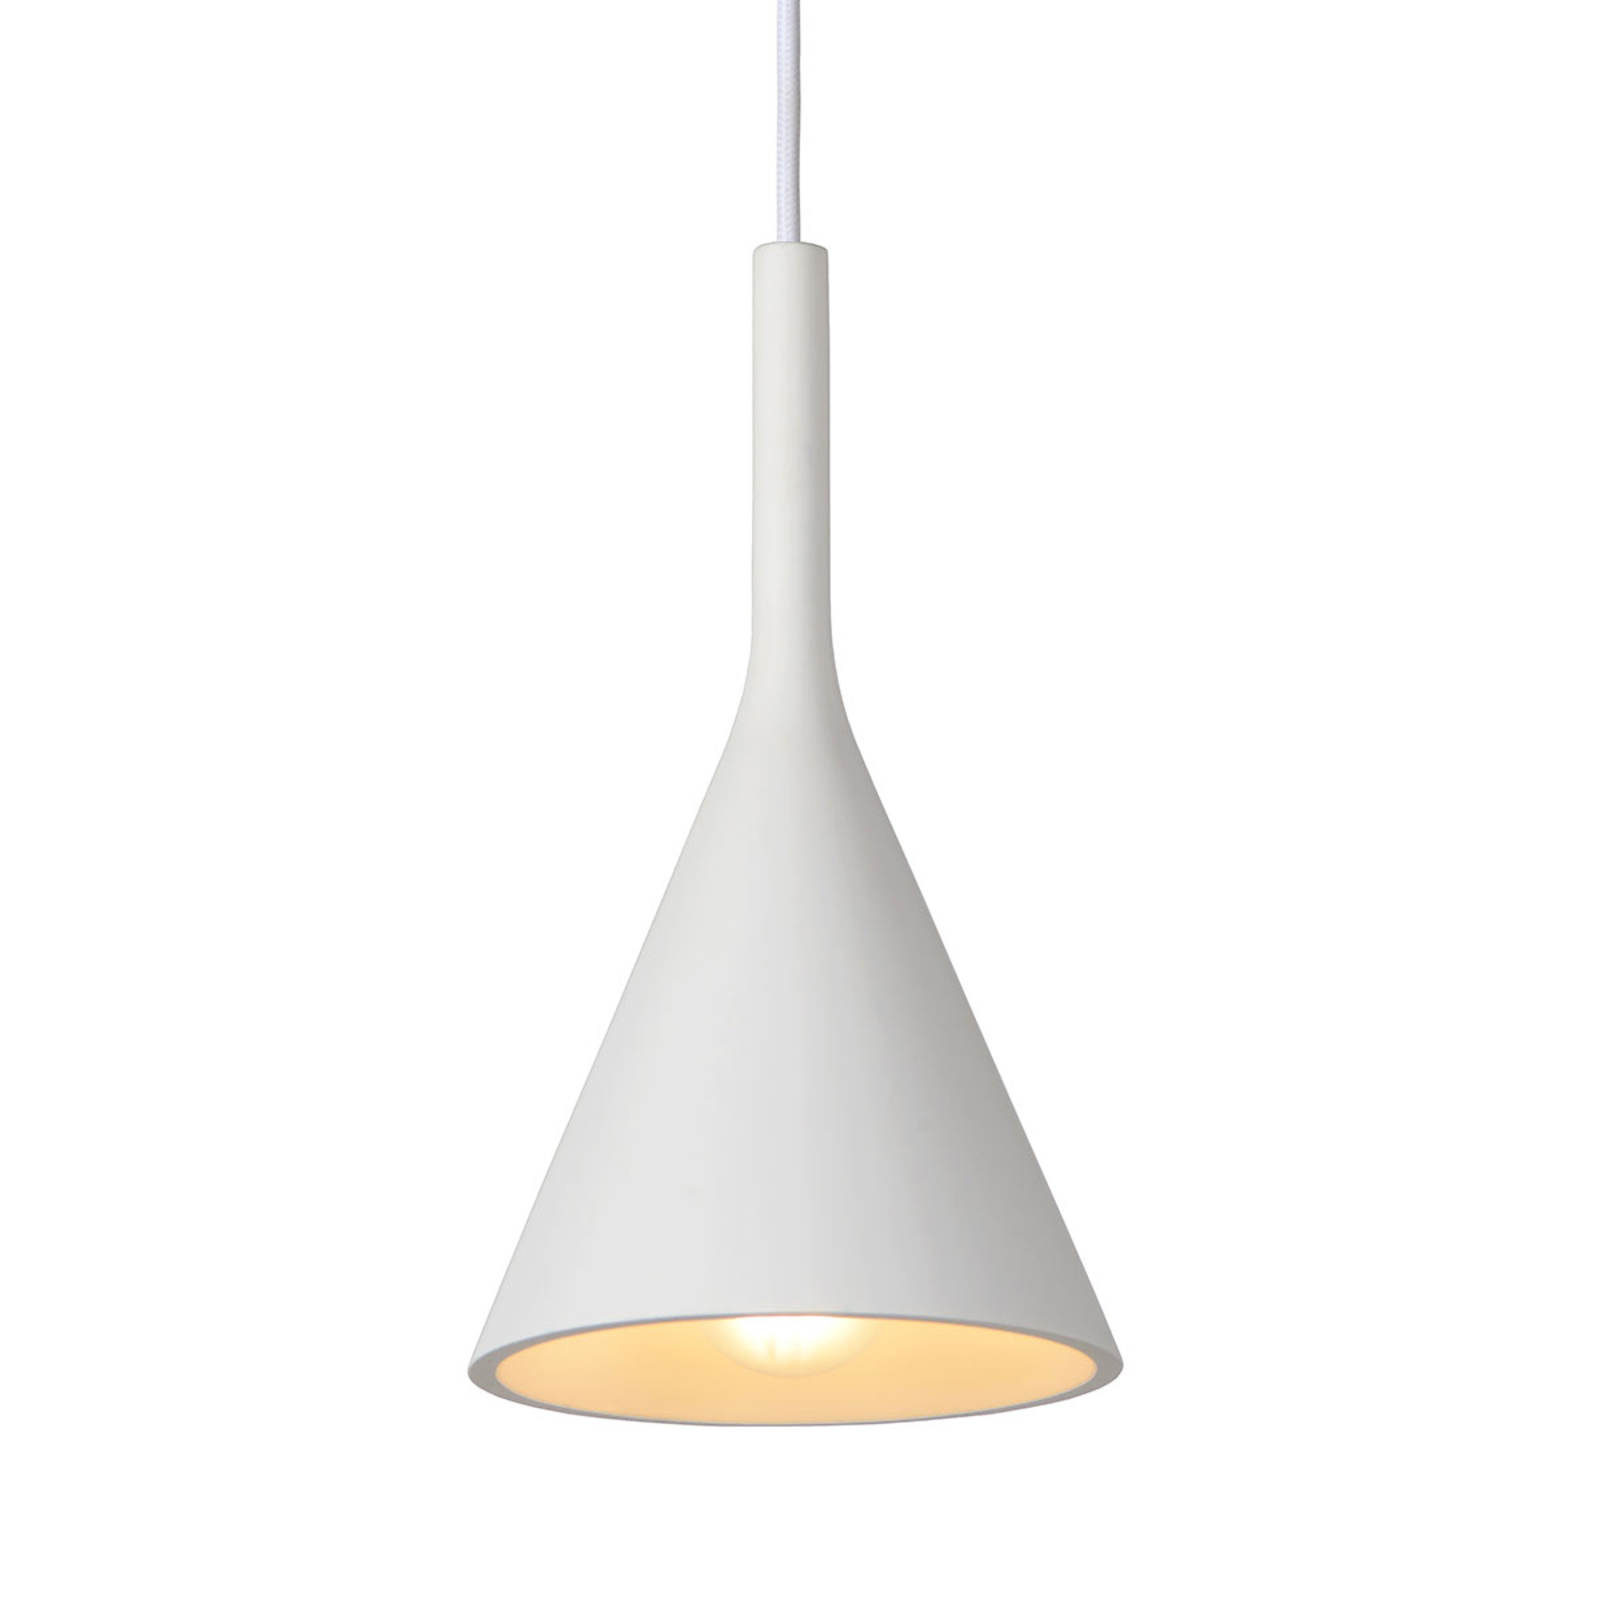 Cone-shaped plaster pendant lamp Gipsy